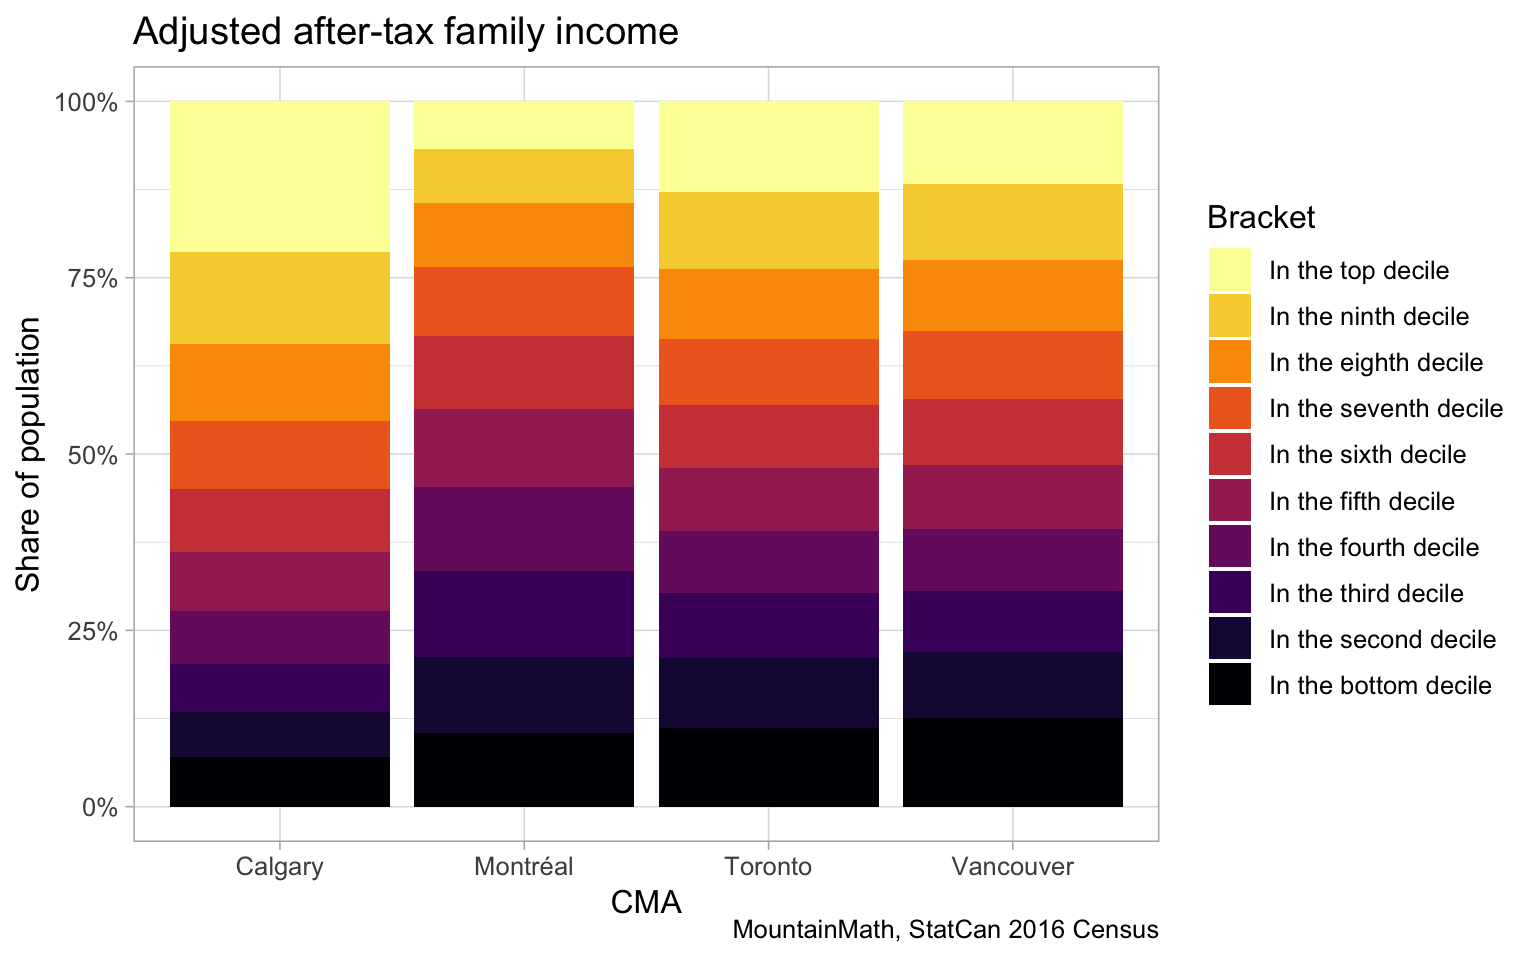 Adjusted family income deciles